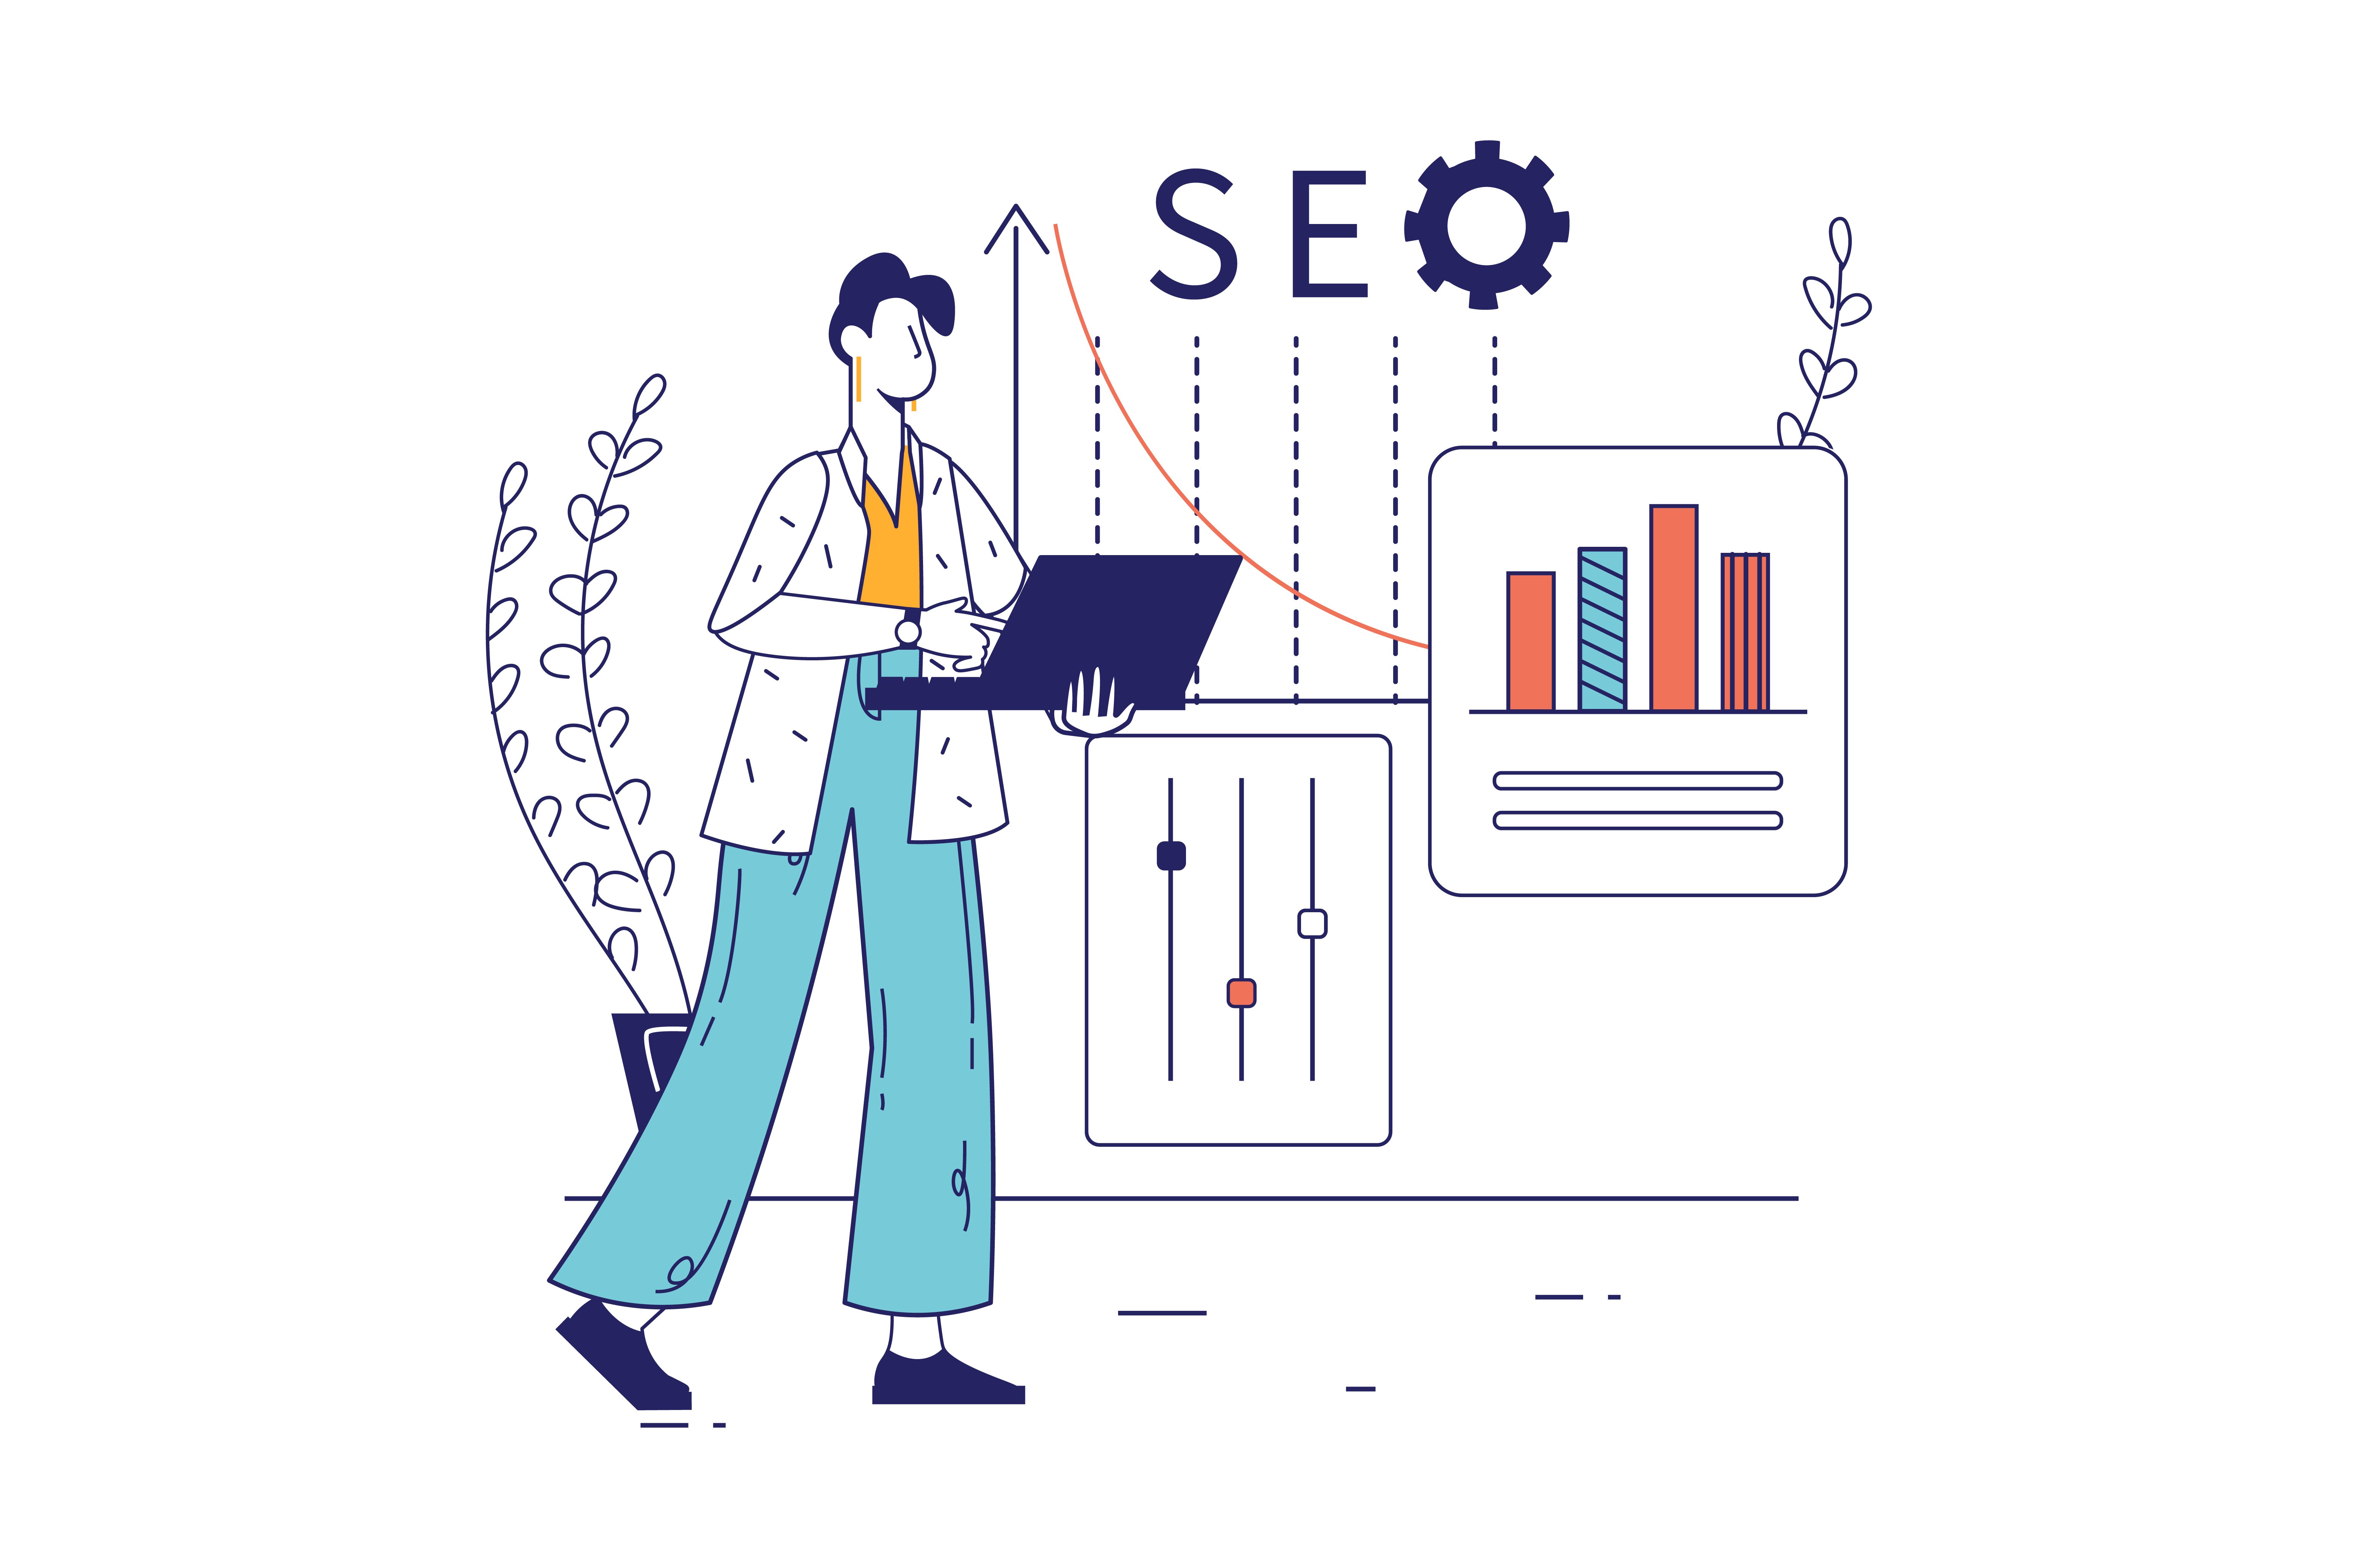 An illustration of a person holding a laptop with upwards graphs in the background. SEO is written in the background.